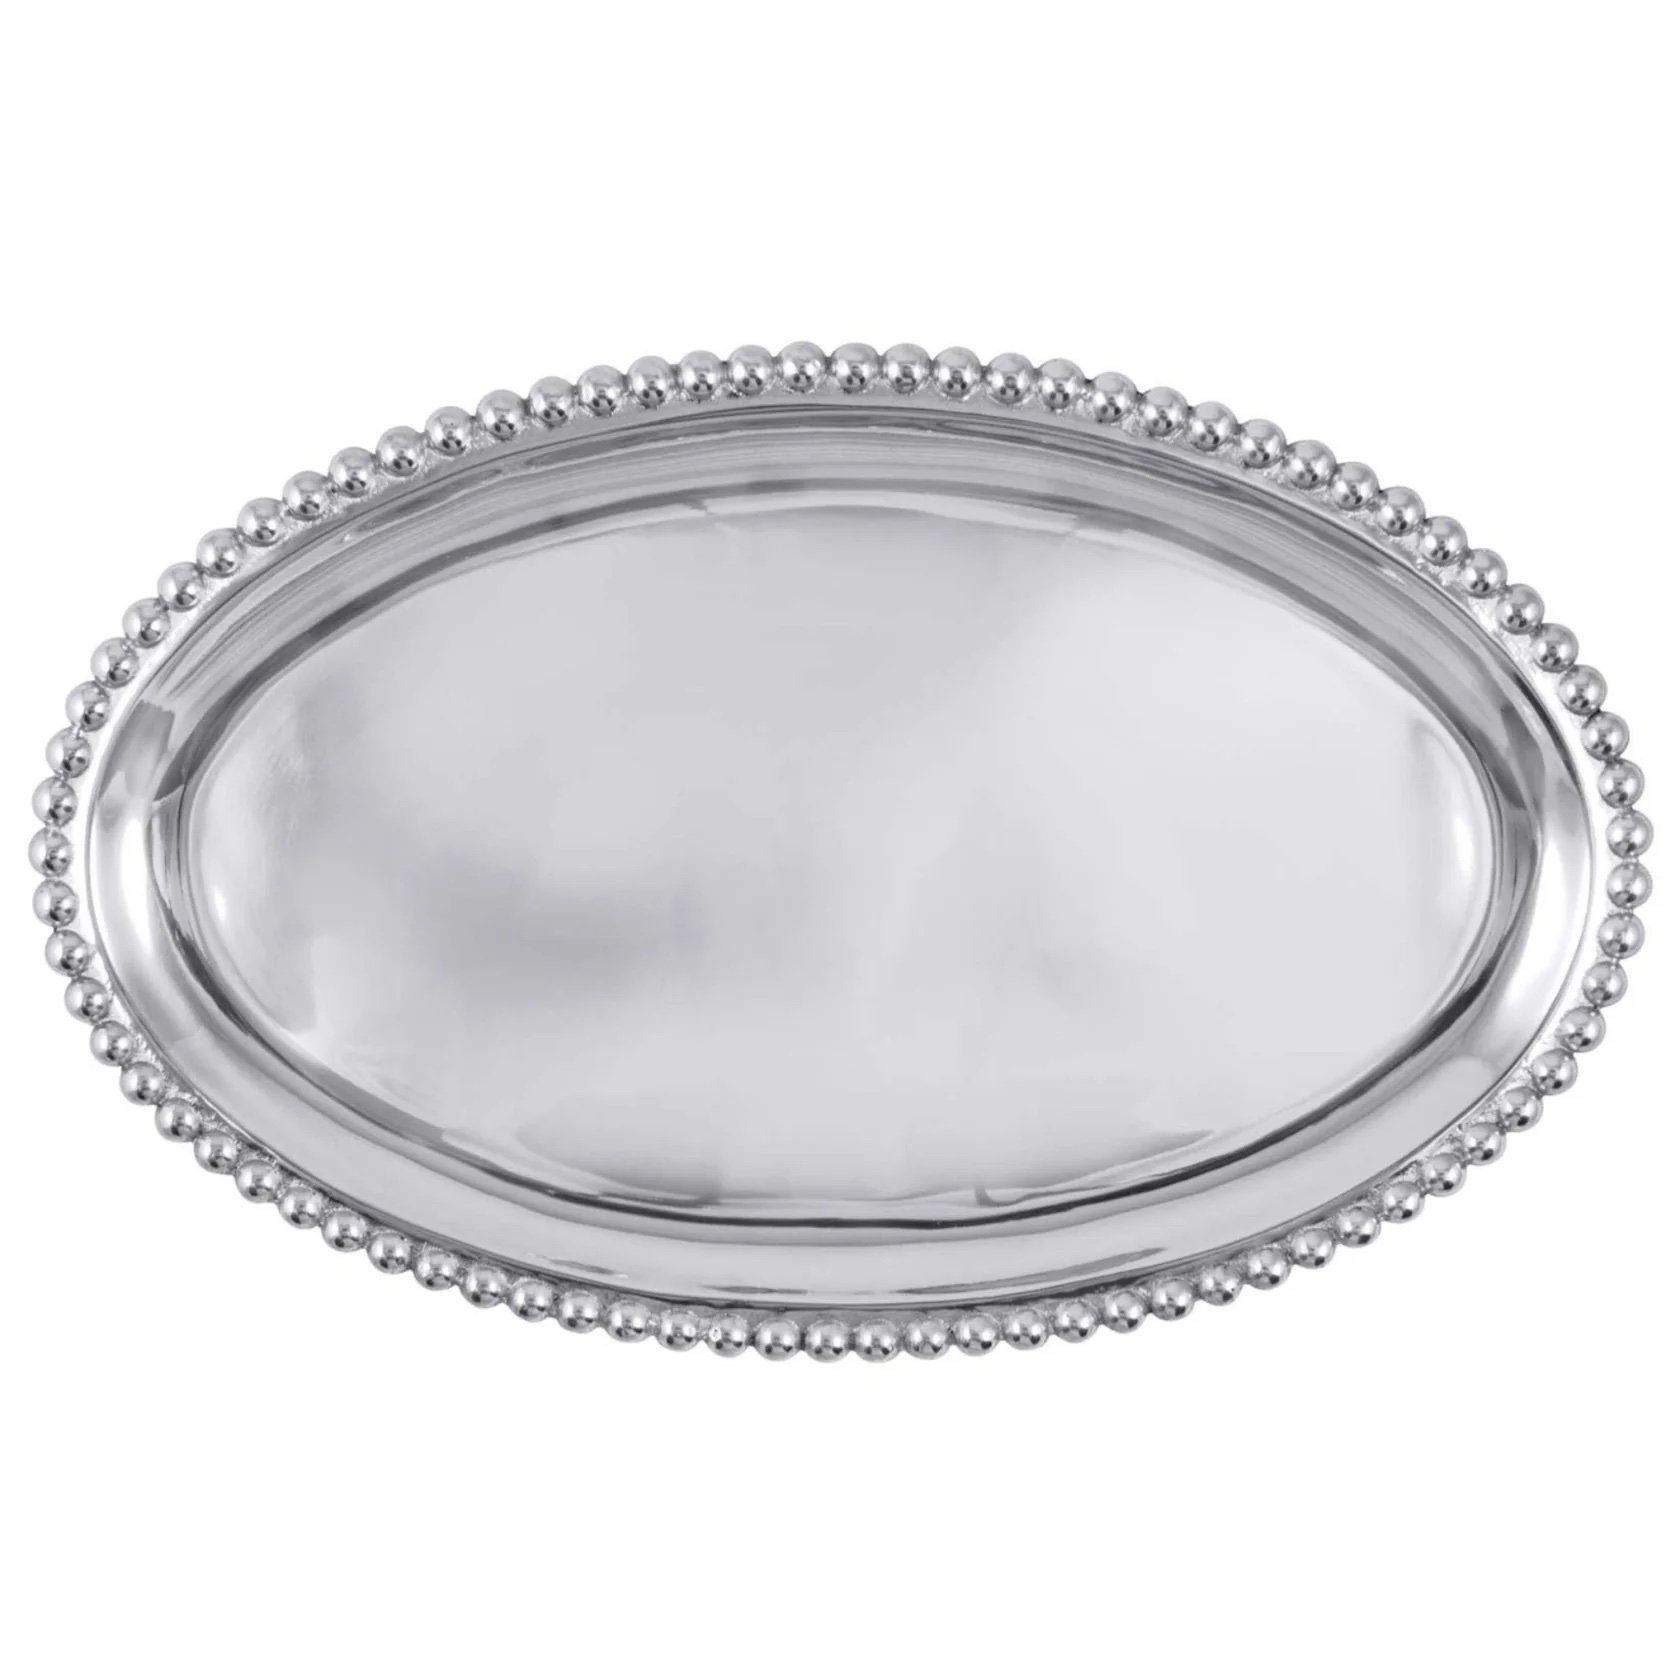 23455- Large Pearled Oval Platter- $110